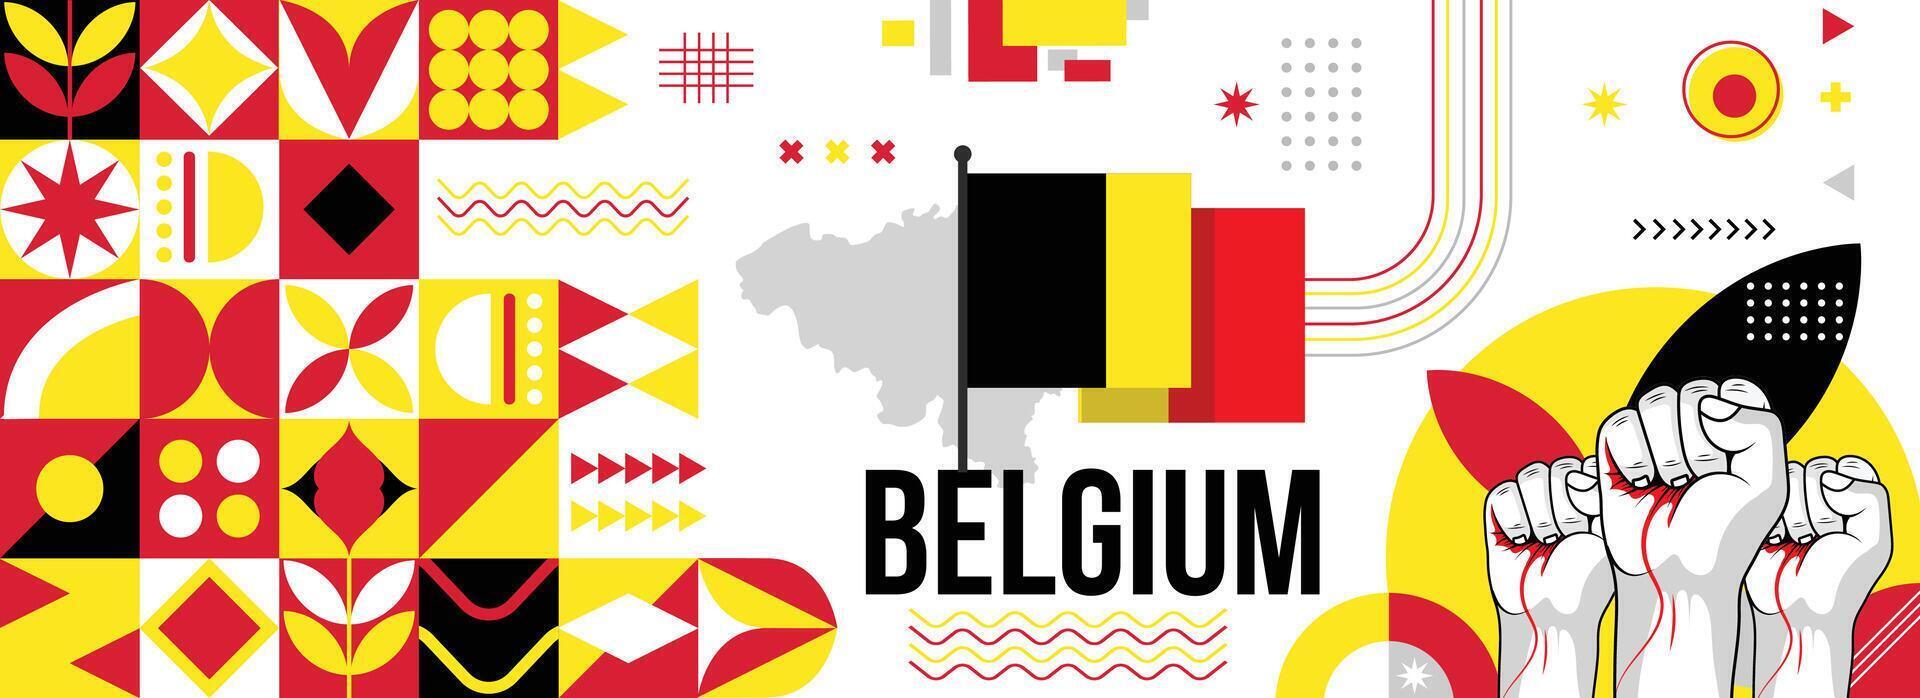 Belgium national or independence day banner for country celebration. Flag and map of Belgium with raised fists. Modern retro design with typorgaphy abstract geometric icons. Vector illustration